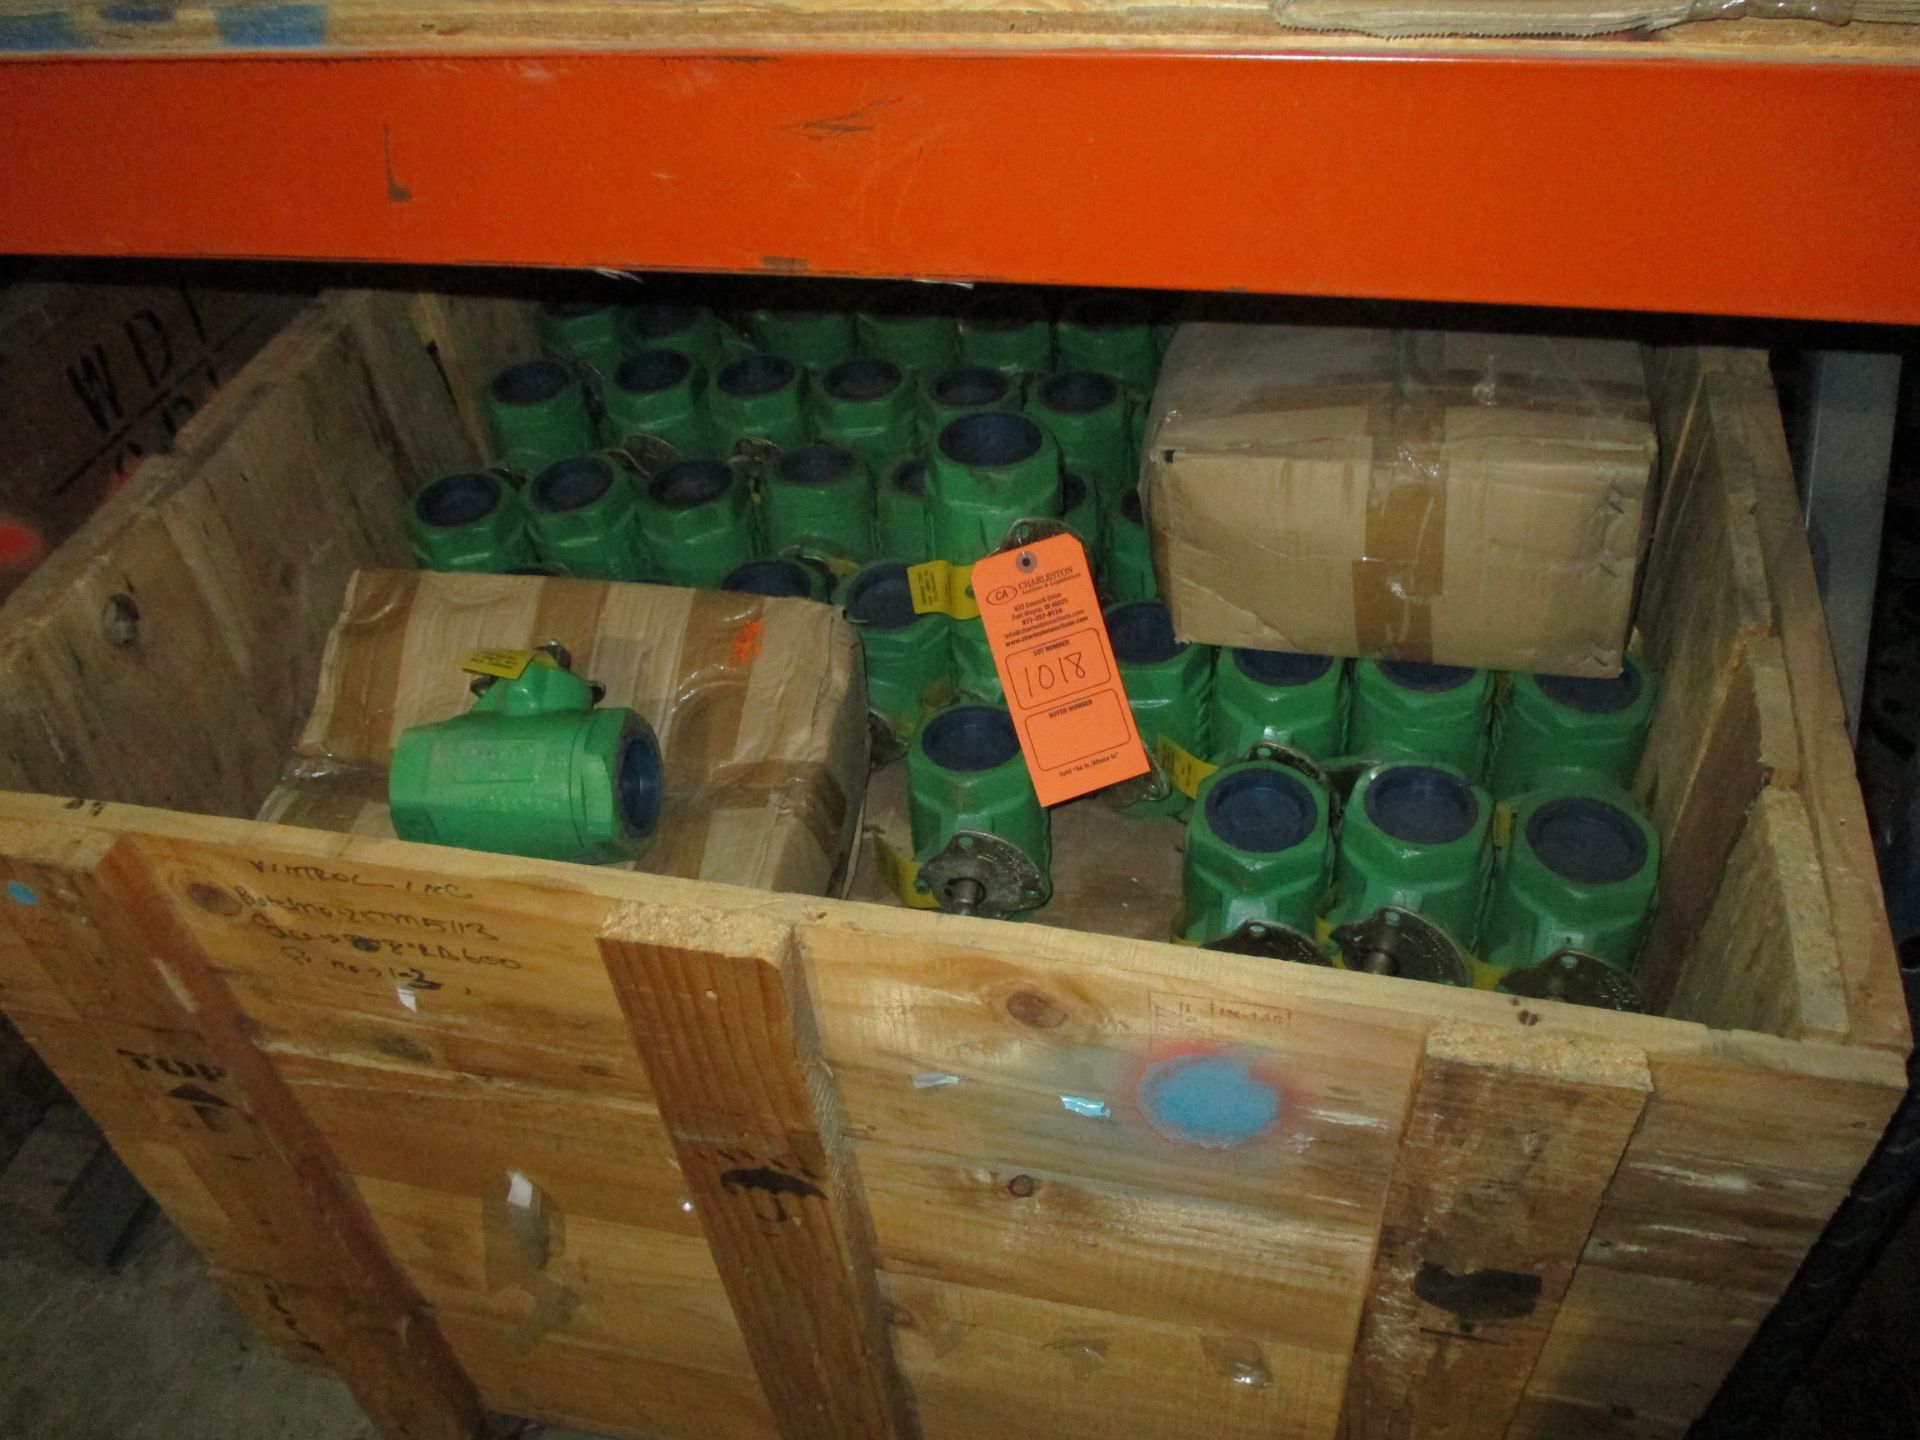 LOT OF (180) VINTROL 27C001-20; 2000W.P. DI HT2415 CHECK VALVE/NACE(LOCATED AT 1731 S. SAN MARCOS,